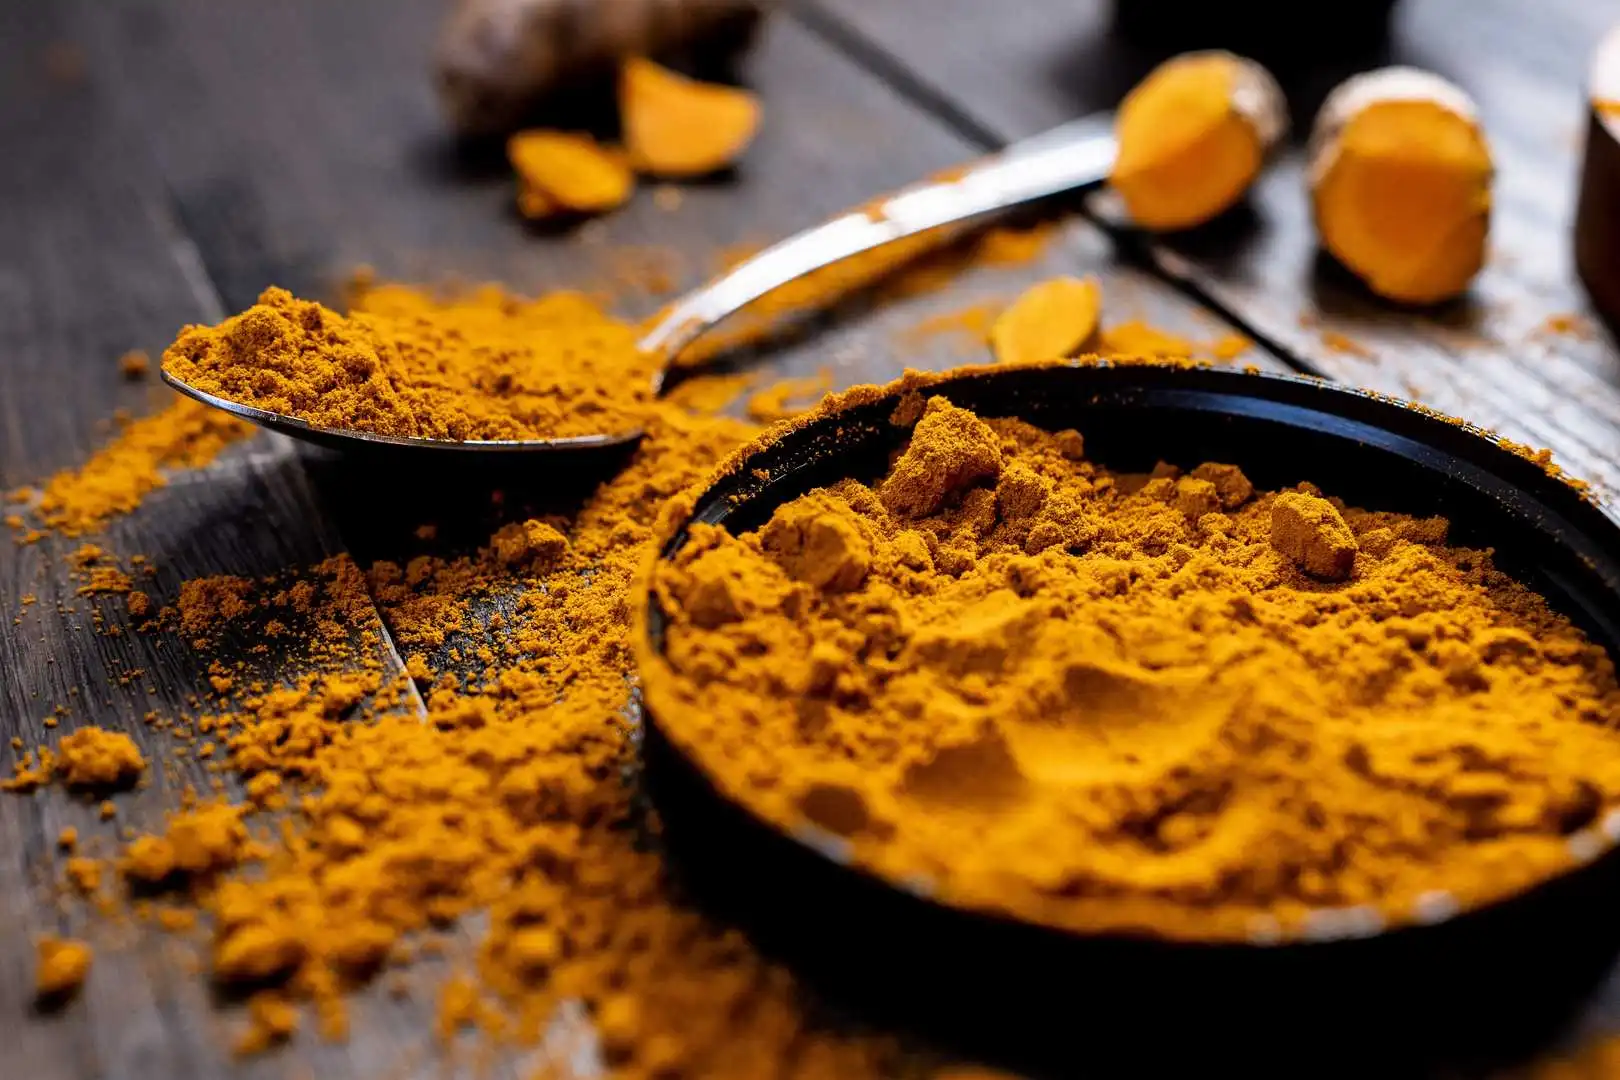 What Are Health Benefits Of Turmeric